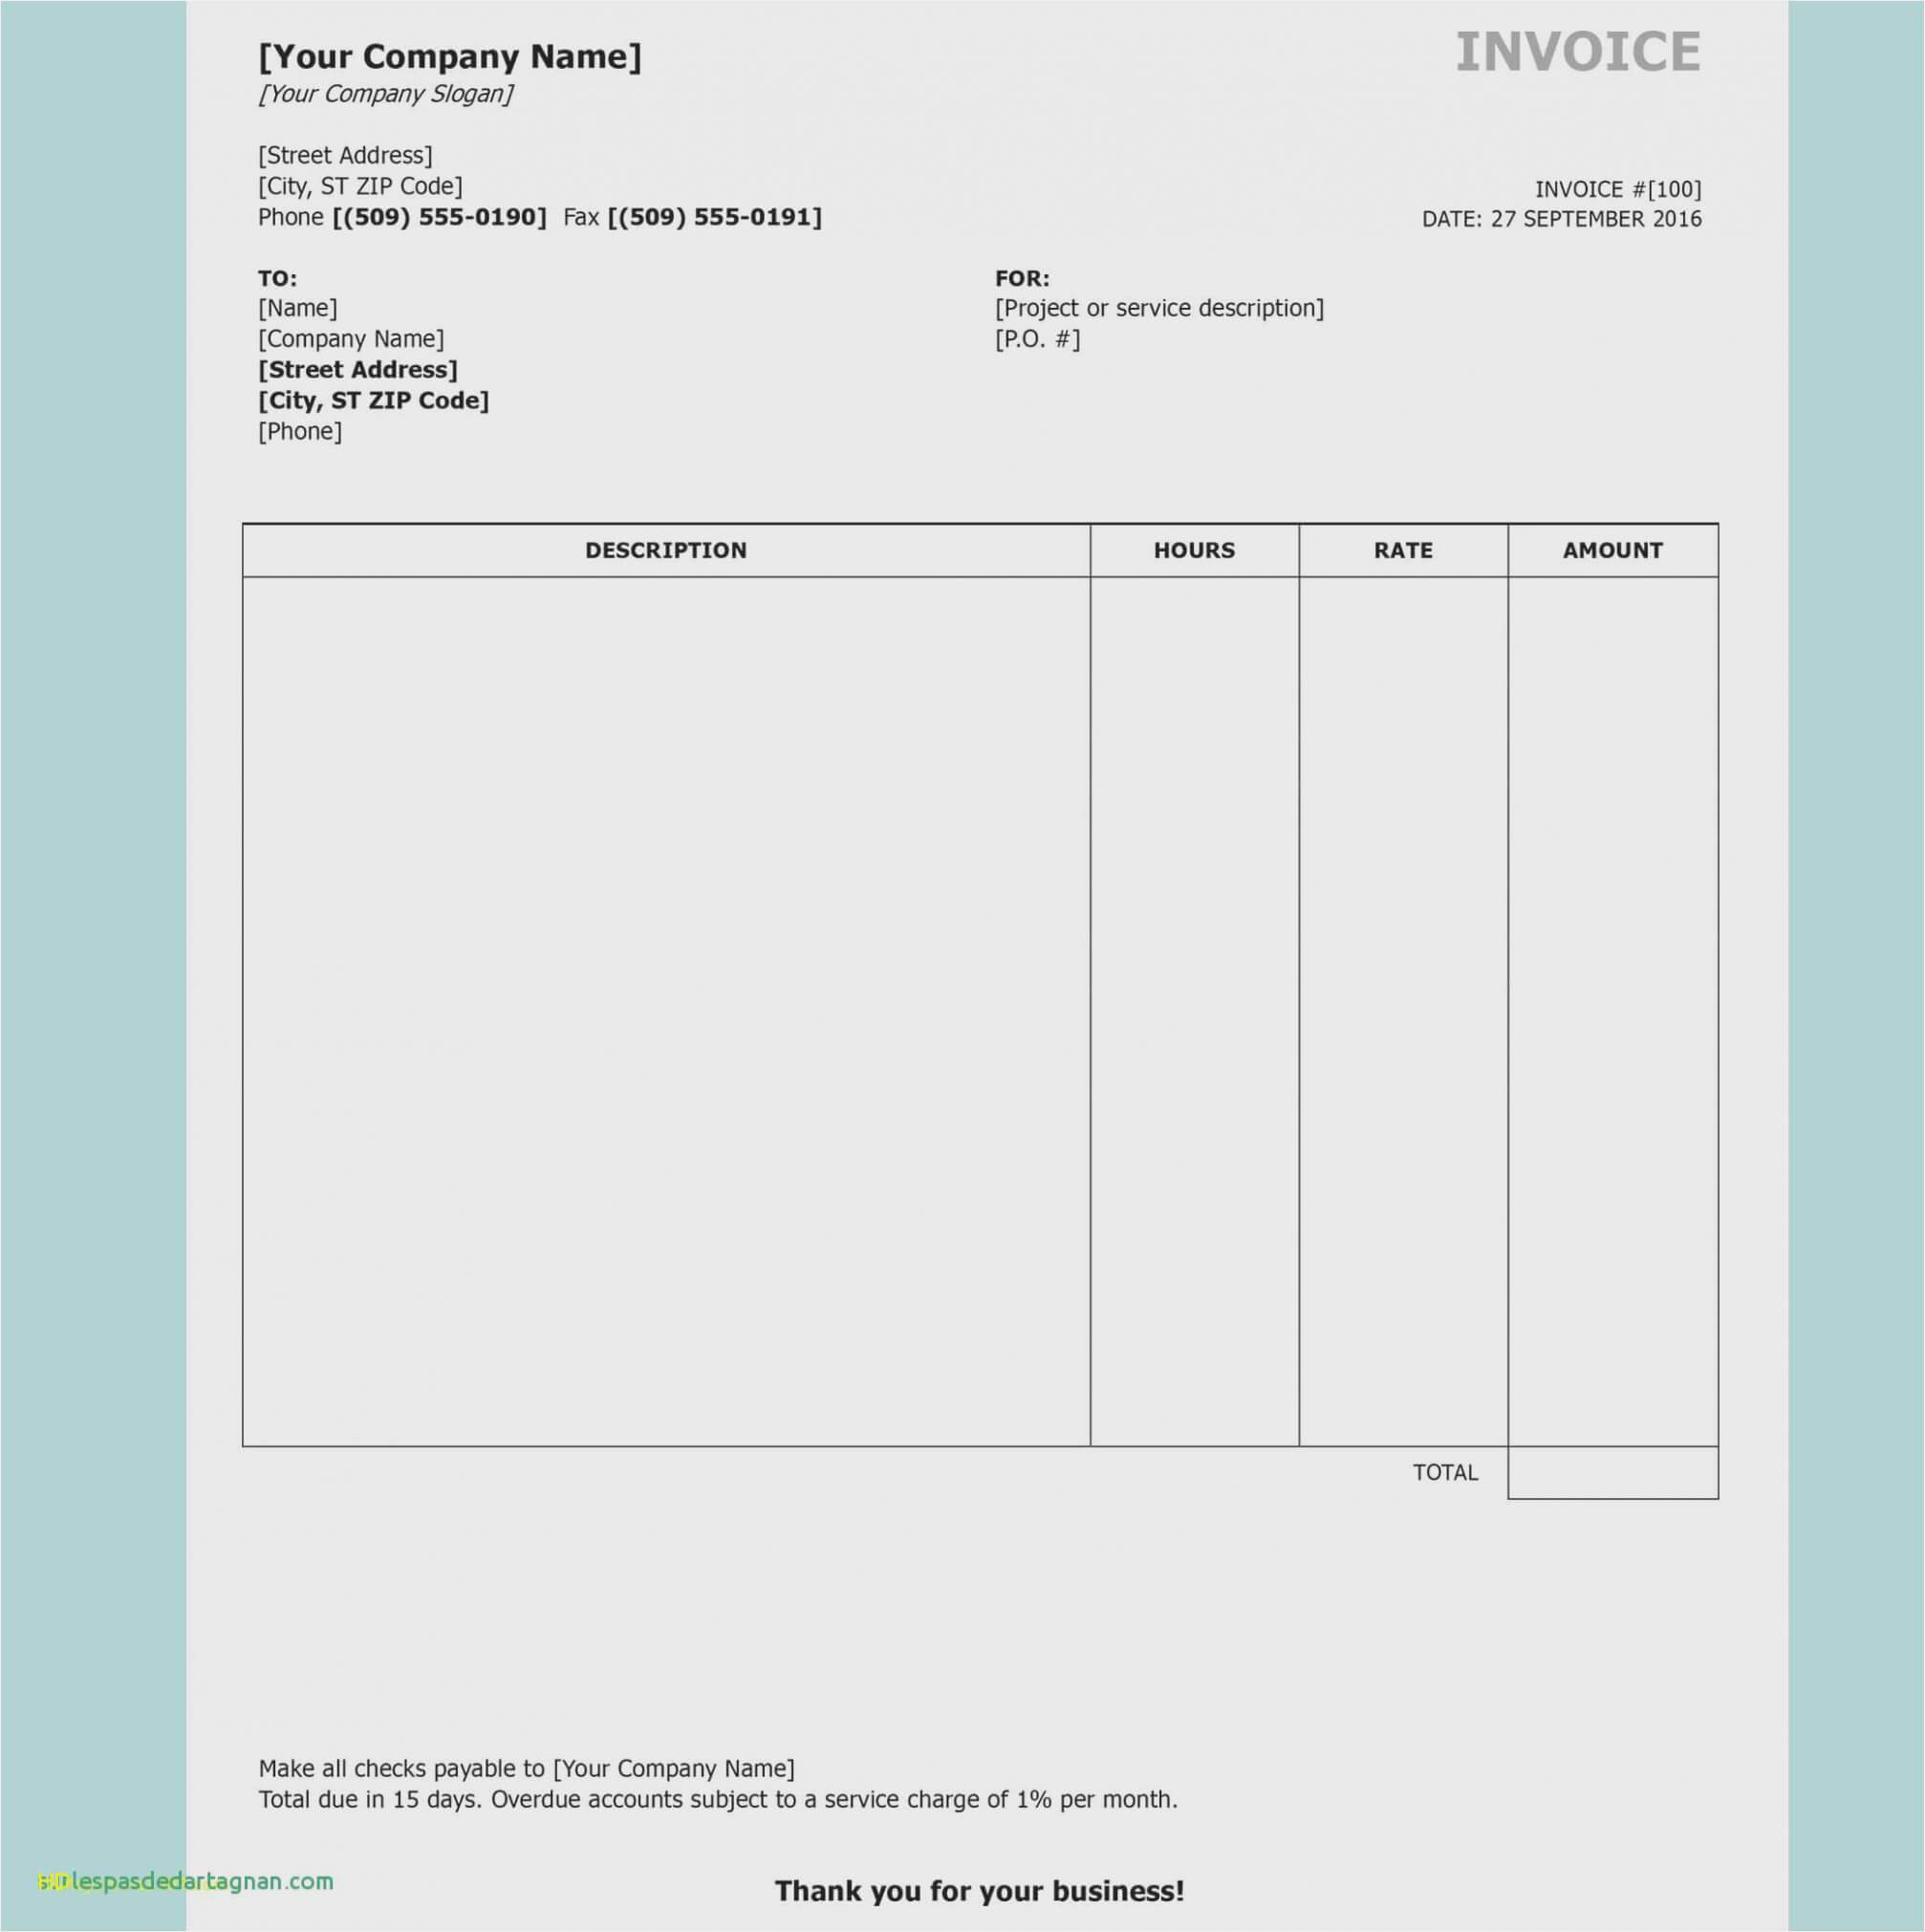 012 Invoice Templates For Ms Word Template Ideas Rent Regarding Microsoft Office Word Invoice Template